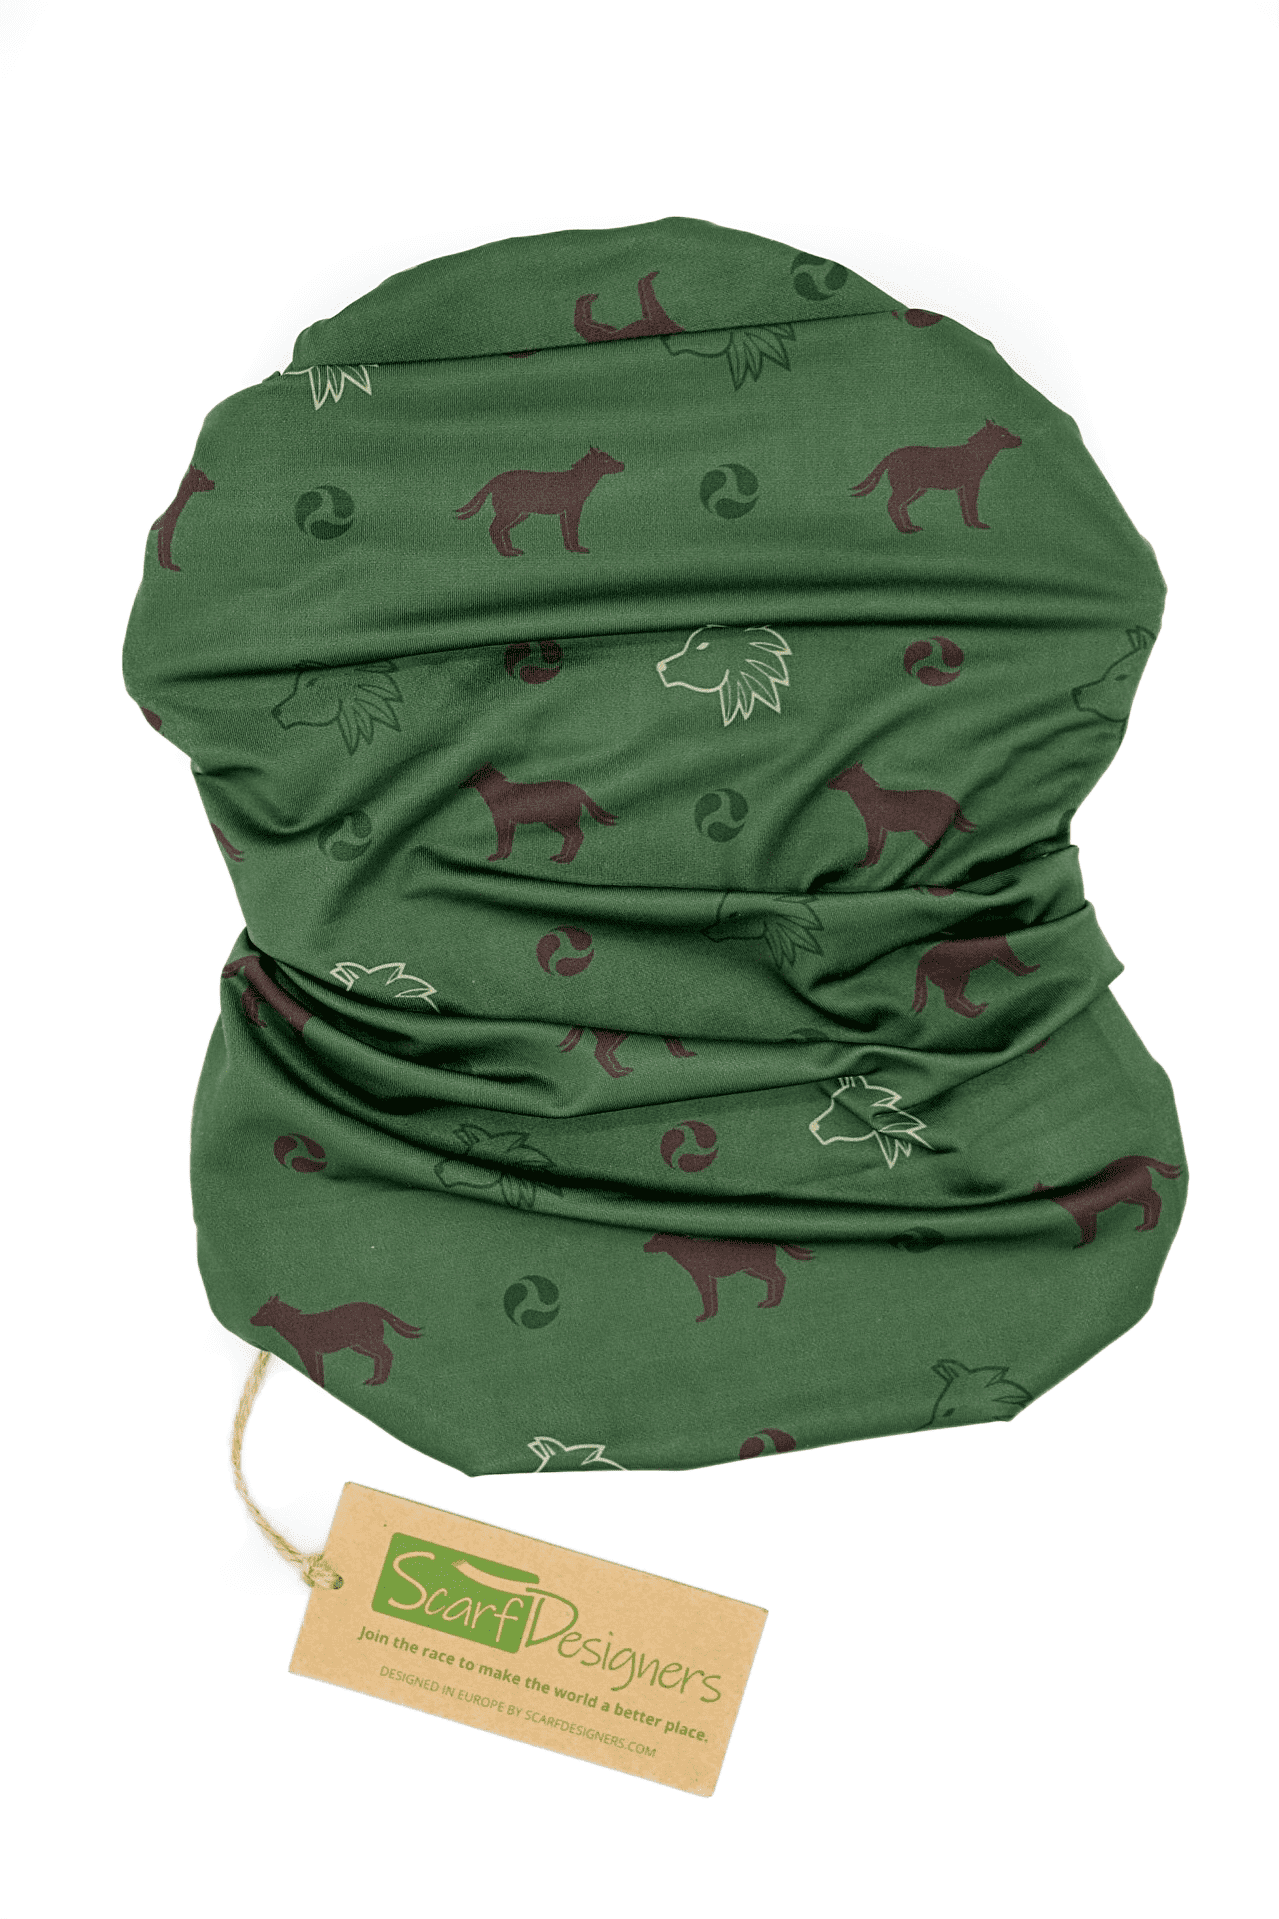 Bandana from recycled polyester with animal pattern in green - Scarf Designers